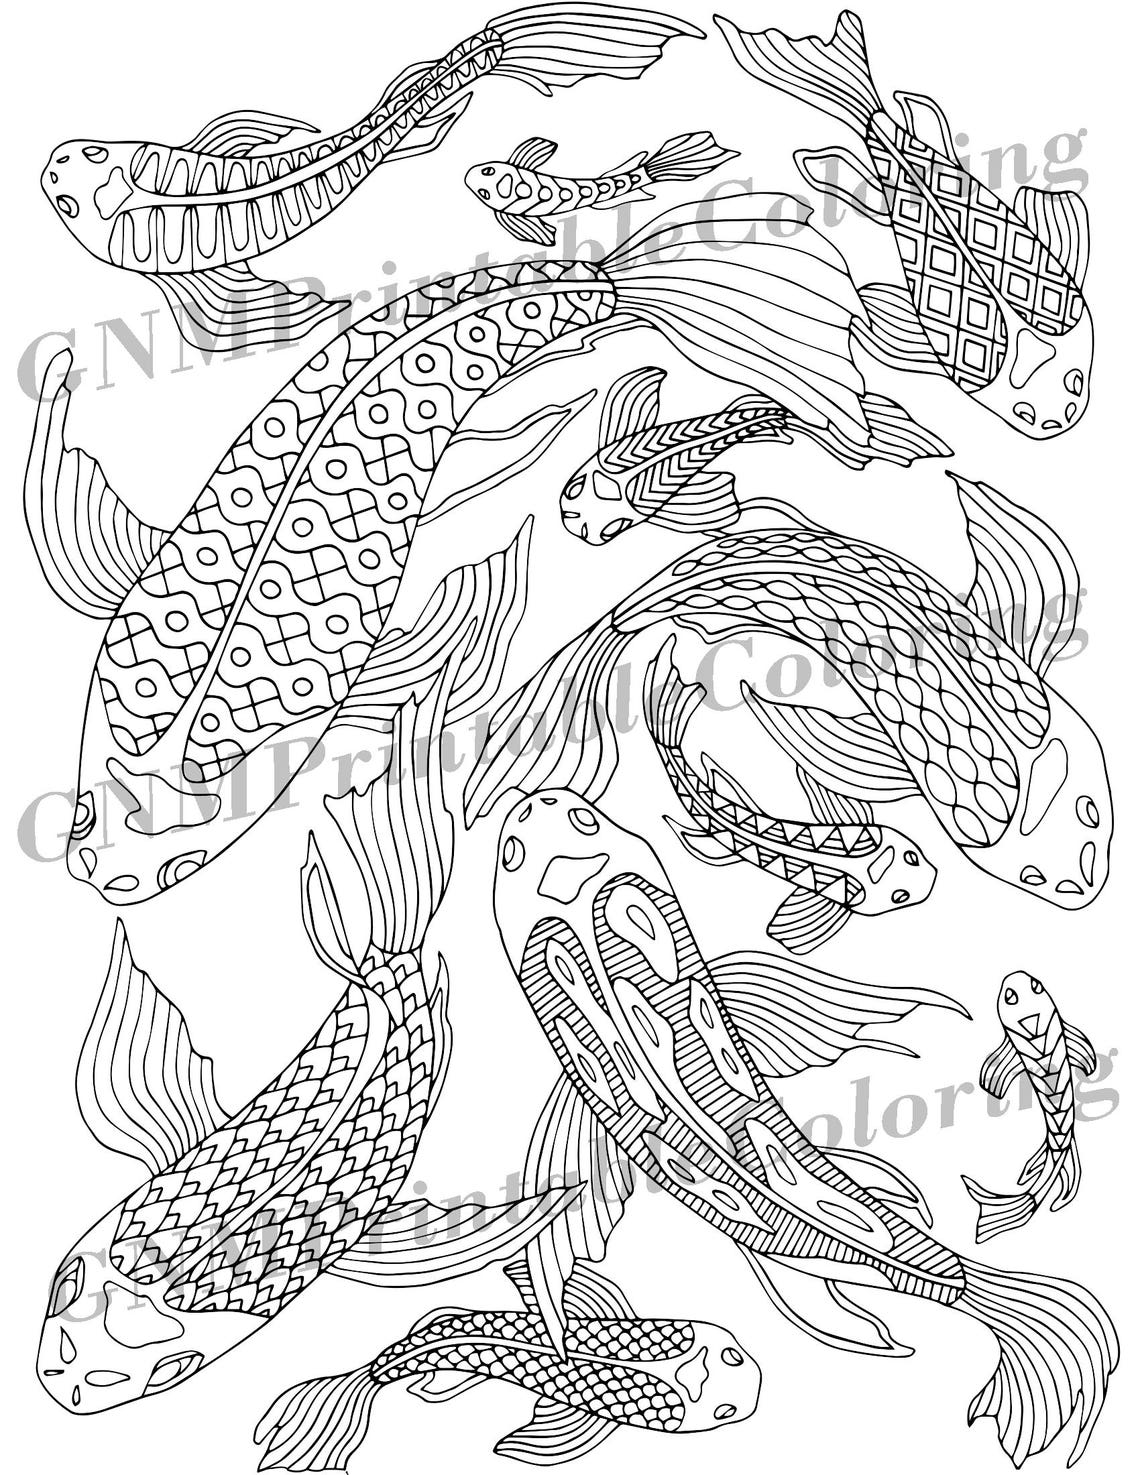 Koi Fish PDF Zentangle Coloring Page Therapy Coloring | Etsy